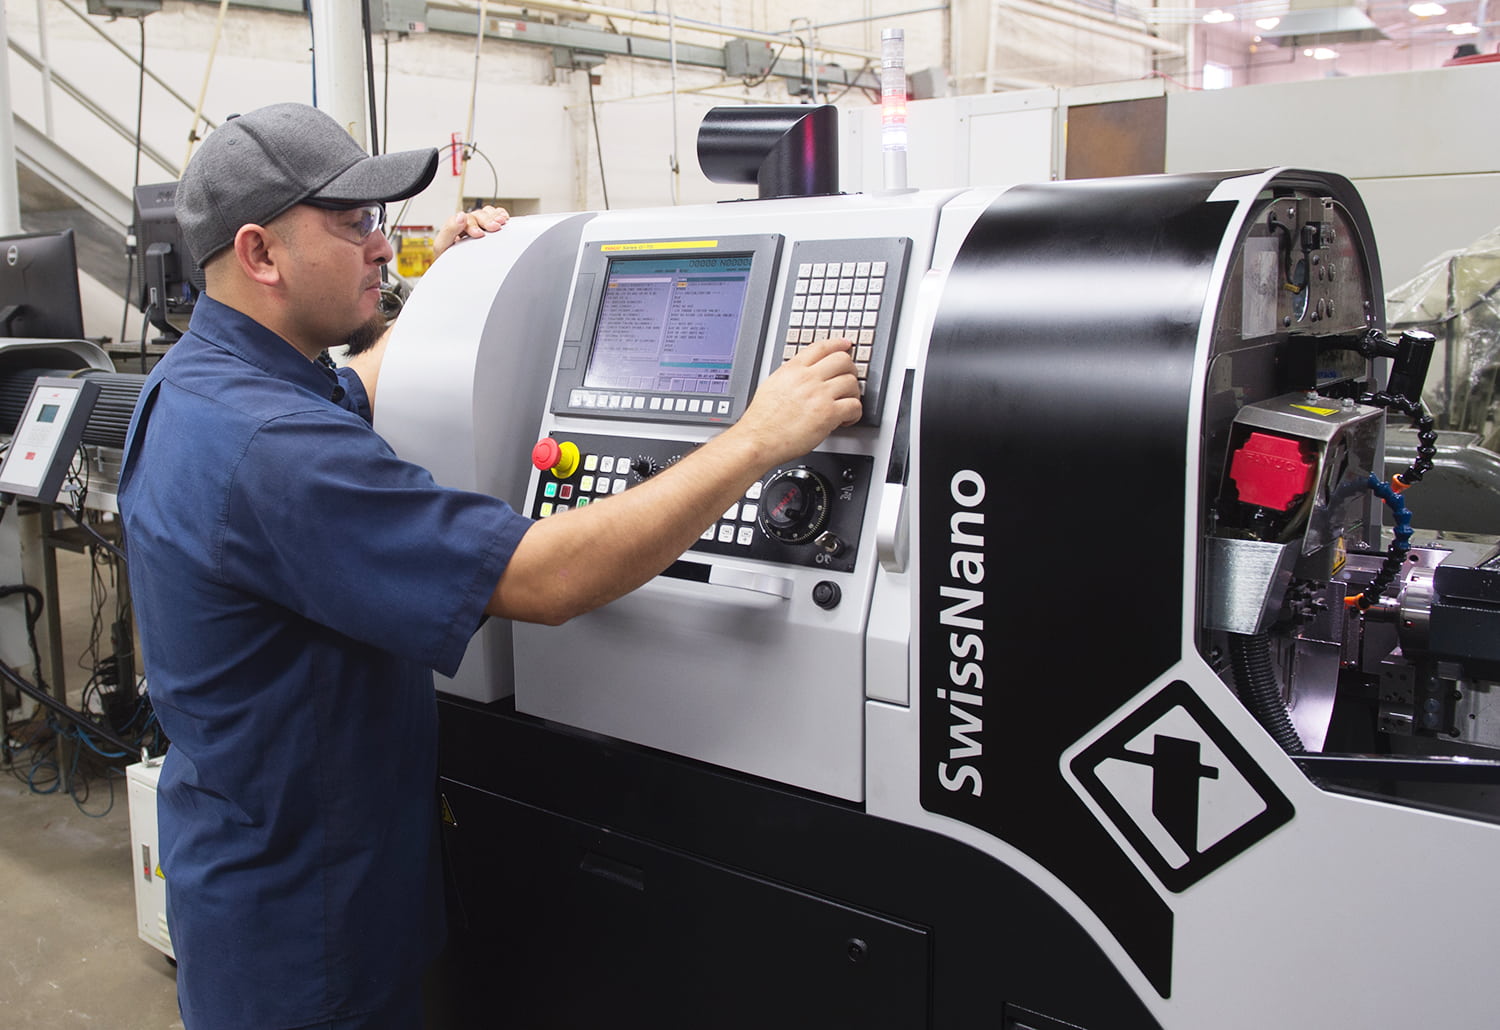 Isreal, a year 3 machinist apprentice, operates a Tornos SwissNano machine with FANUC Series 0i-TD controls.